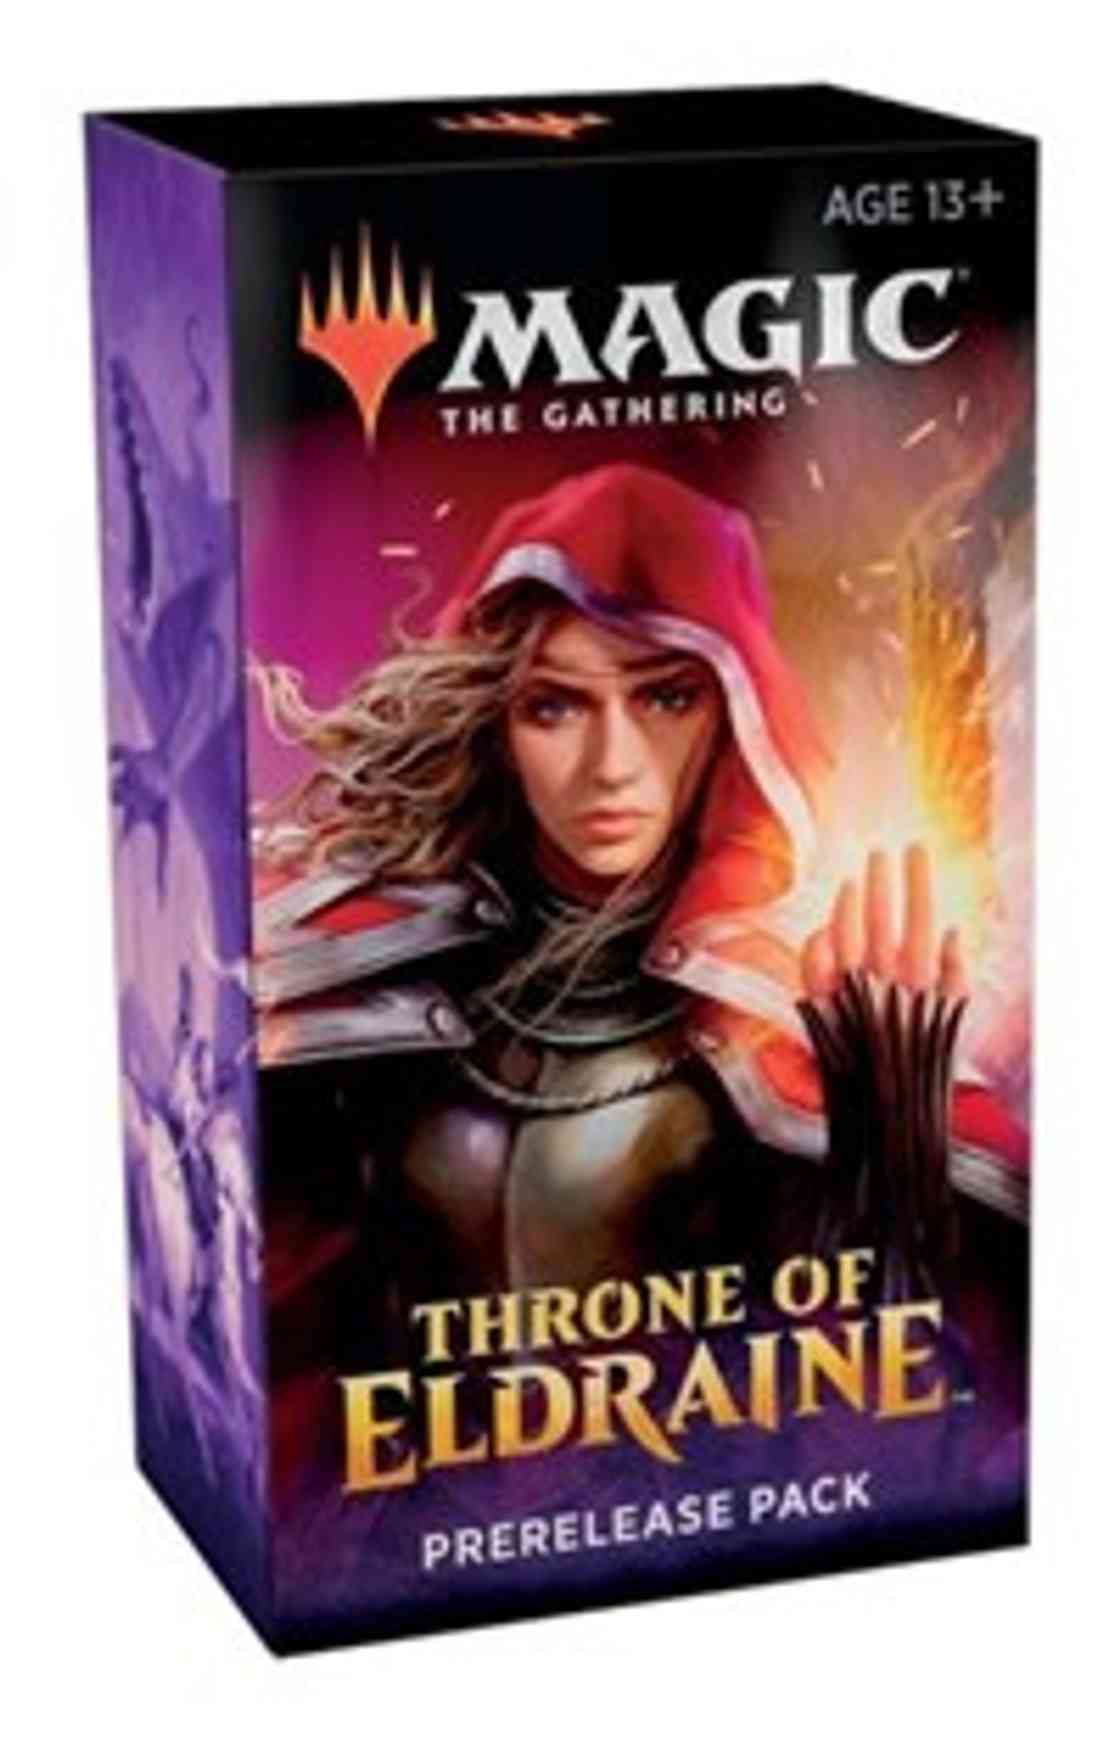 Throne of Eldraine Prerelease Pack magic card front